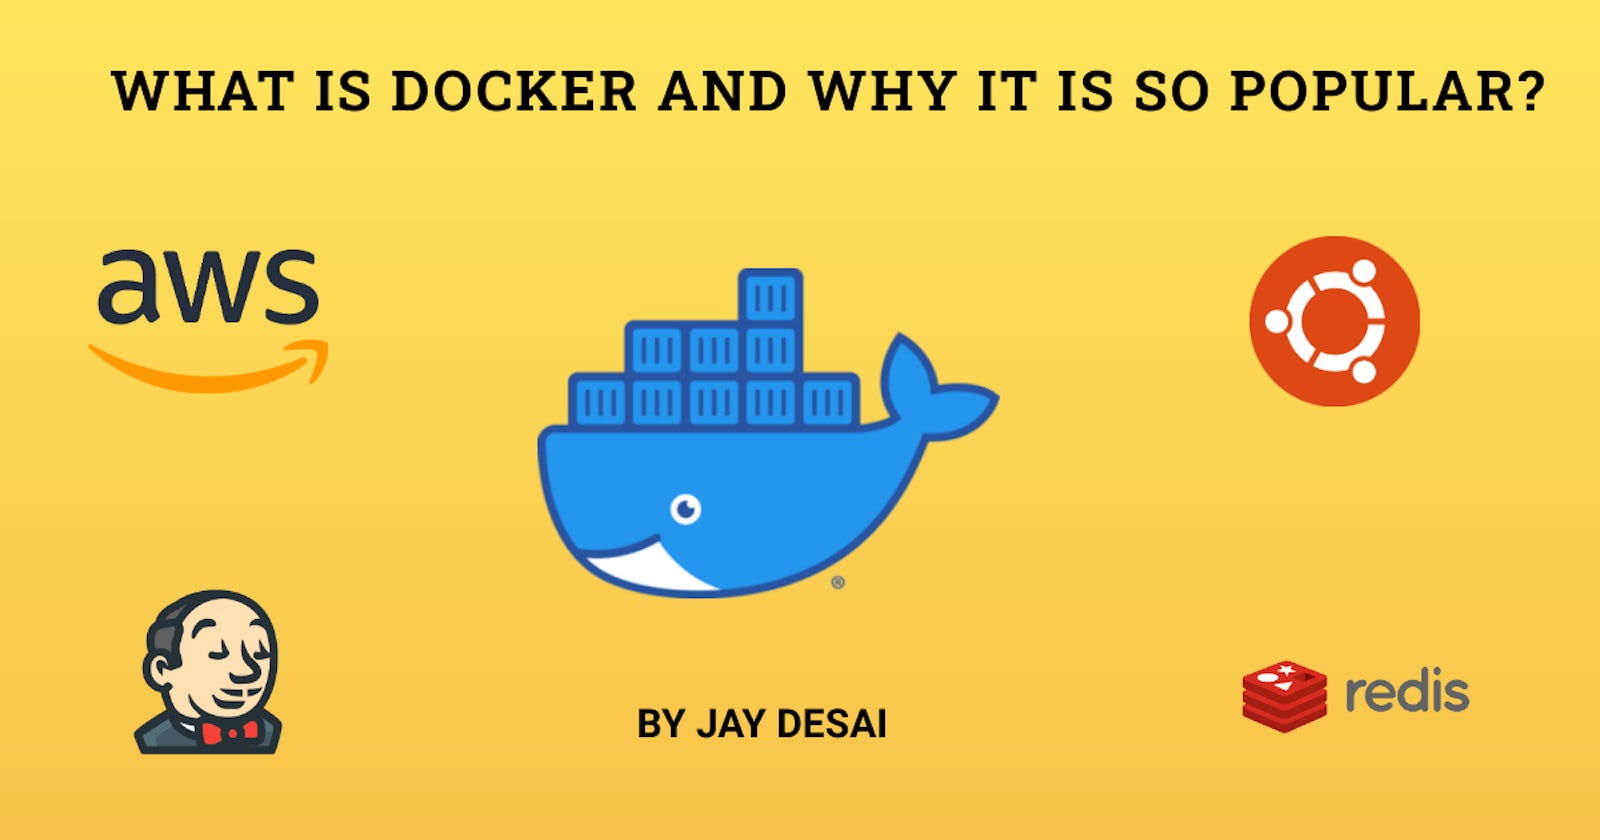 What is Docker and Why it is so popular?